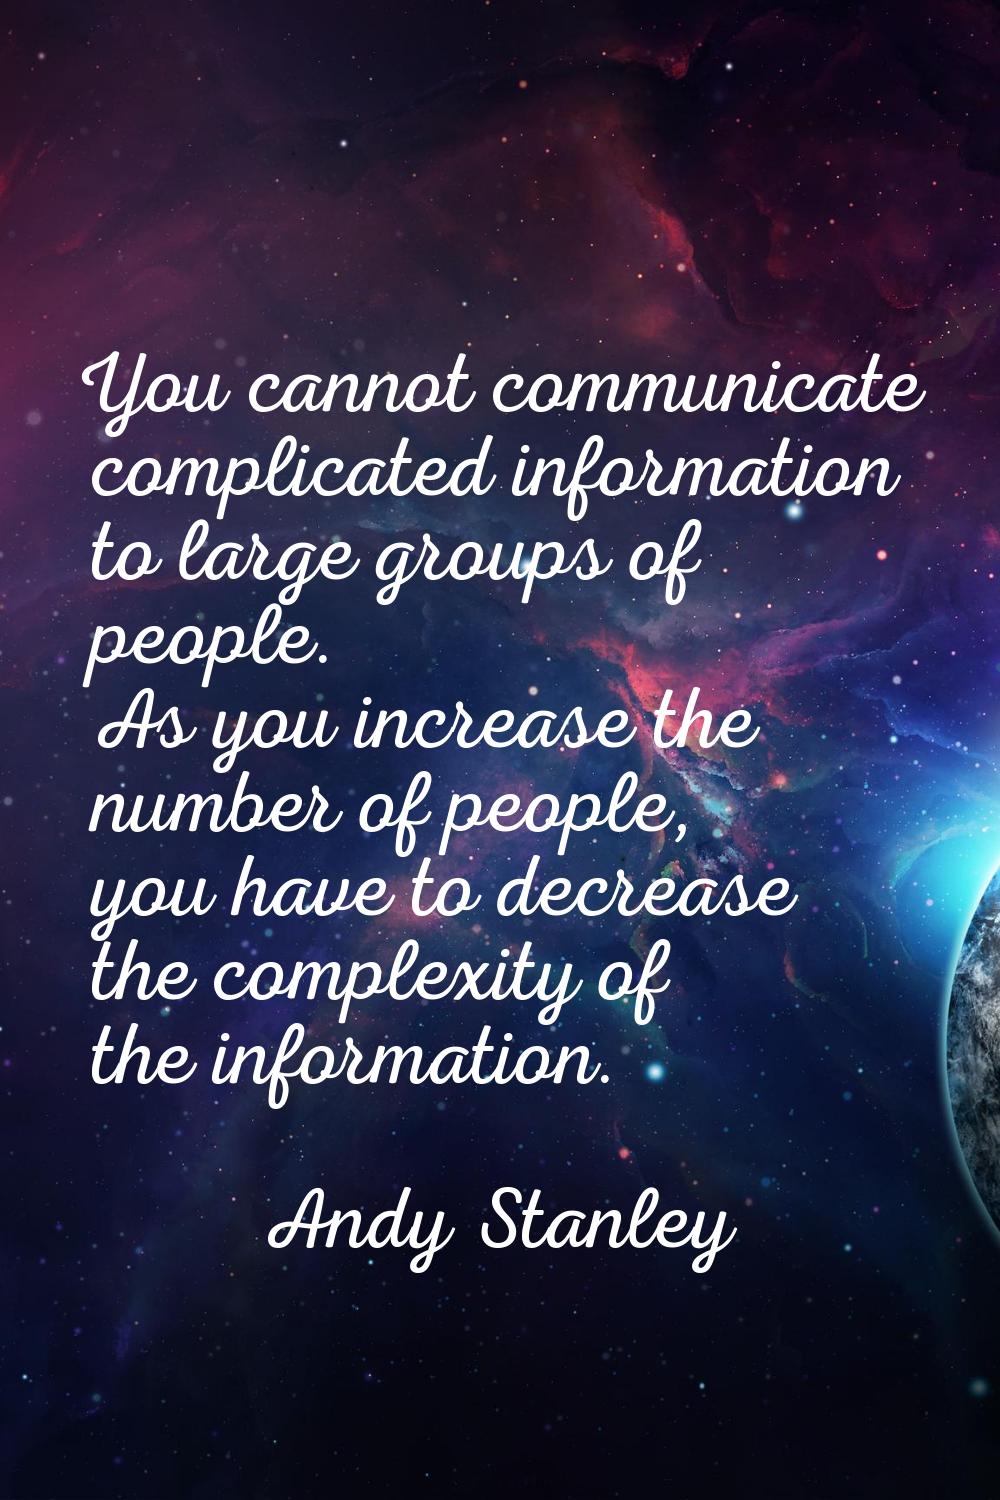 You cannot communicate complicated information to large groups of people. As you increase the numbe